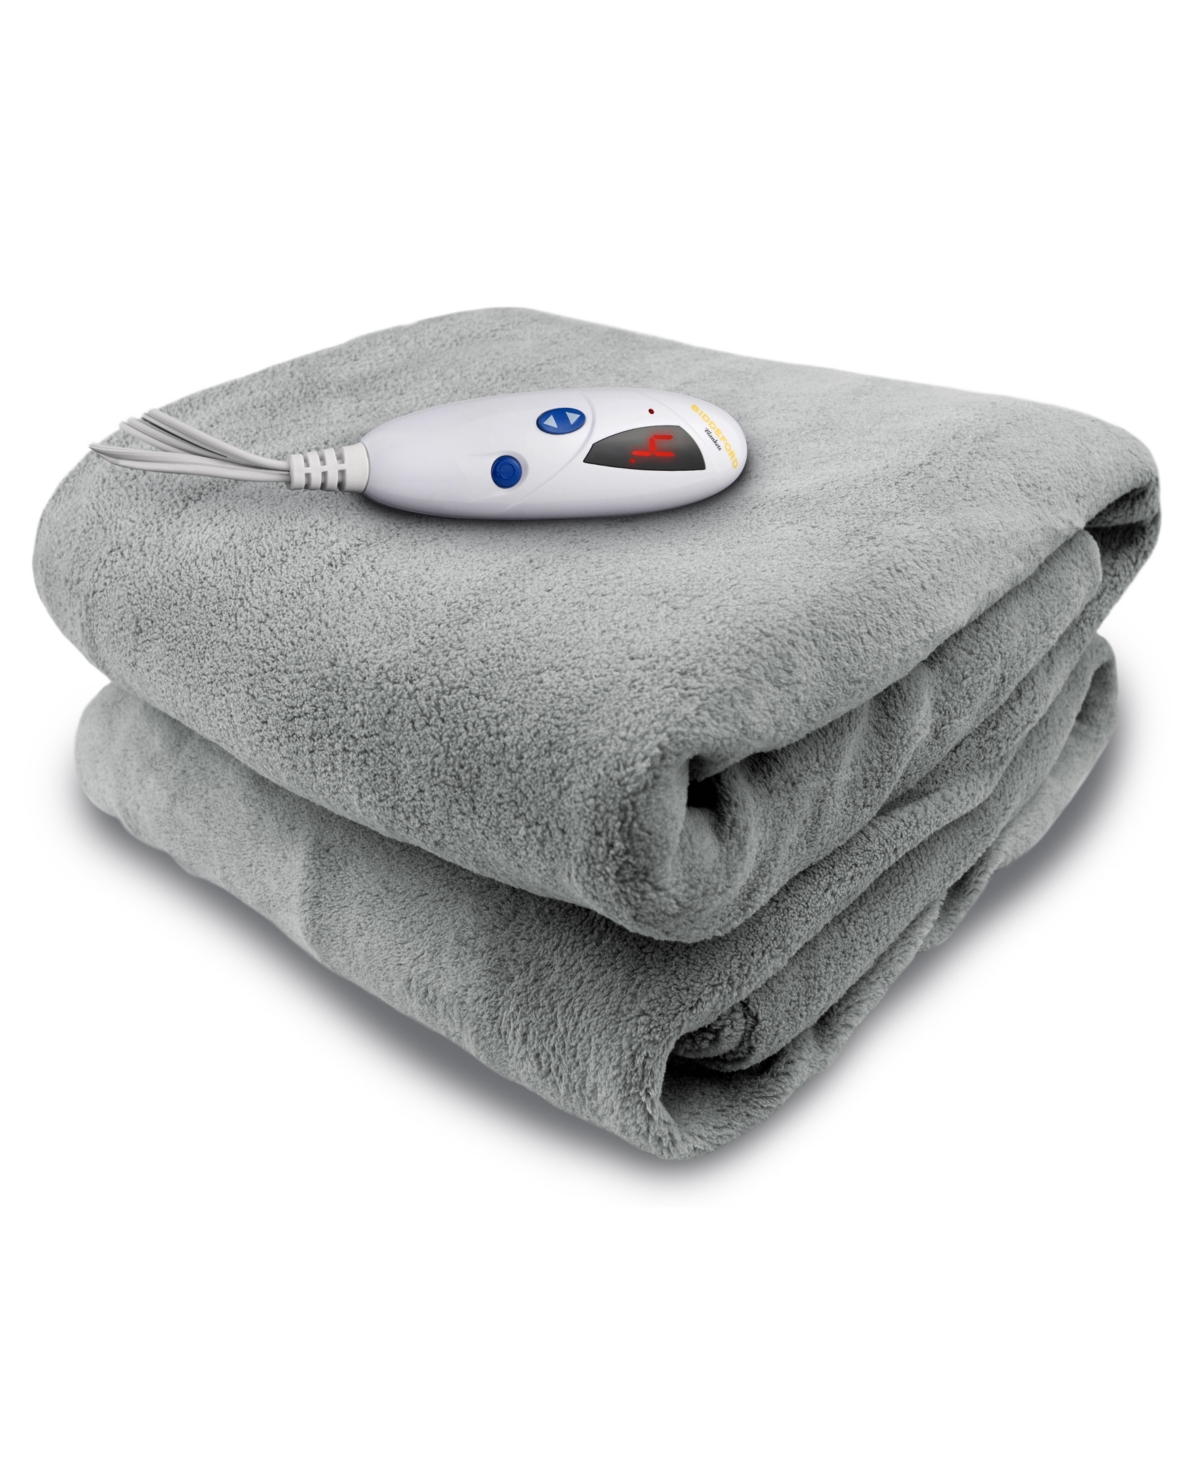 Comfort Knit Electric Throw with Analog Controller Bedding